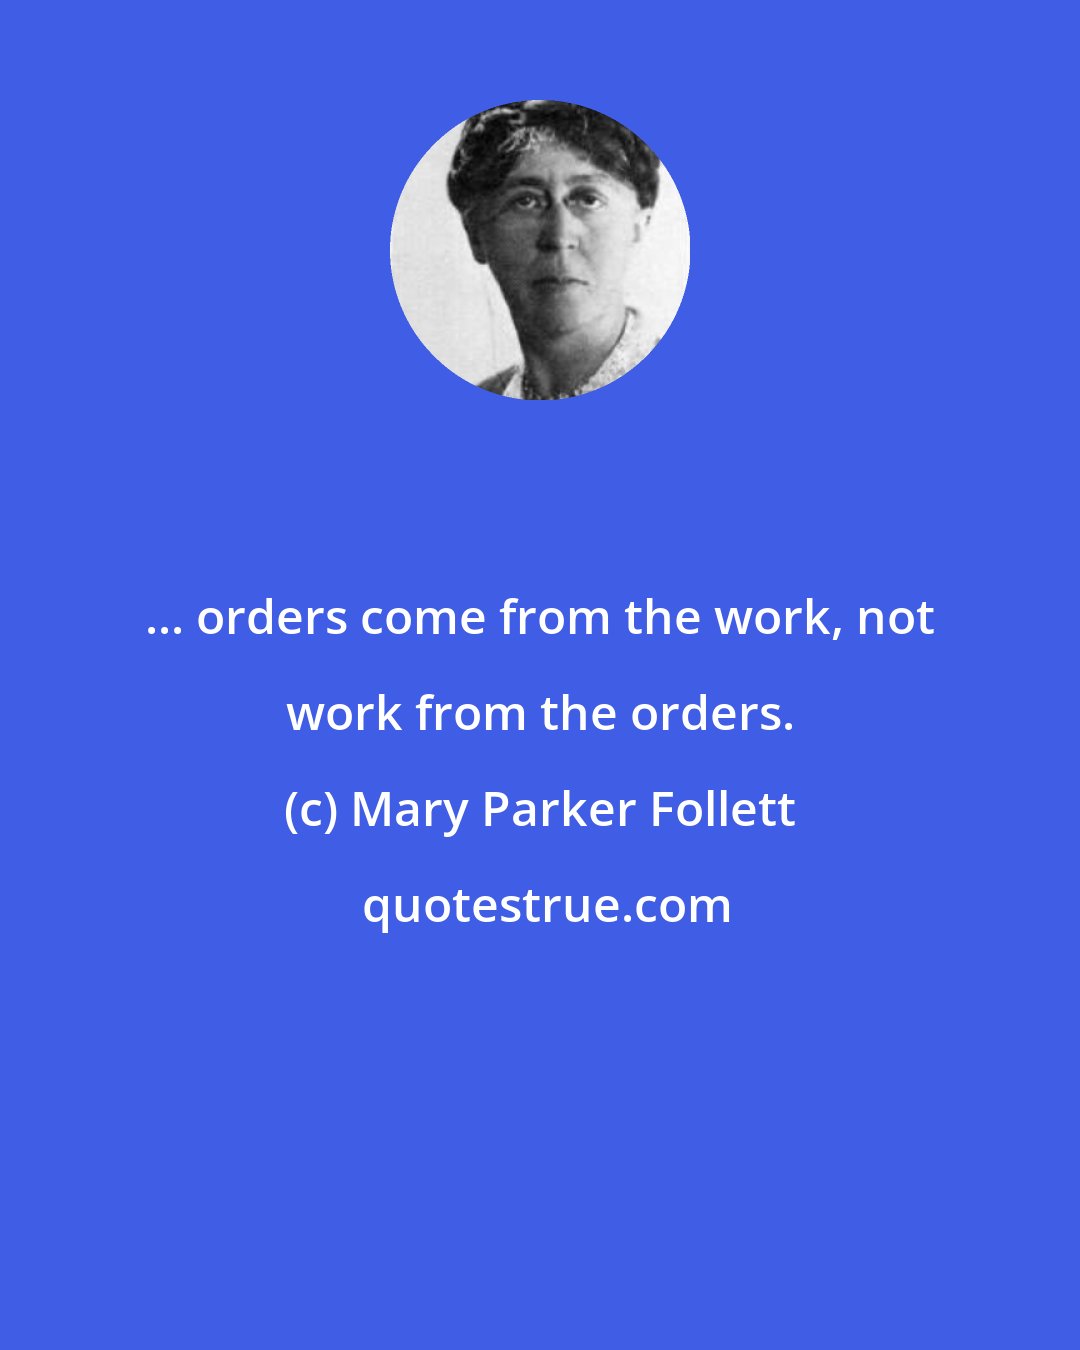 Mary Parker Follett: ... orders come from the work, not work from the orders.